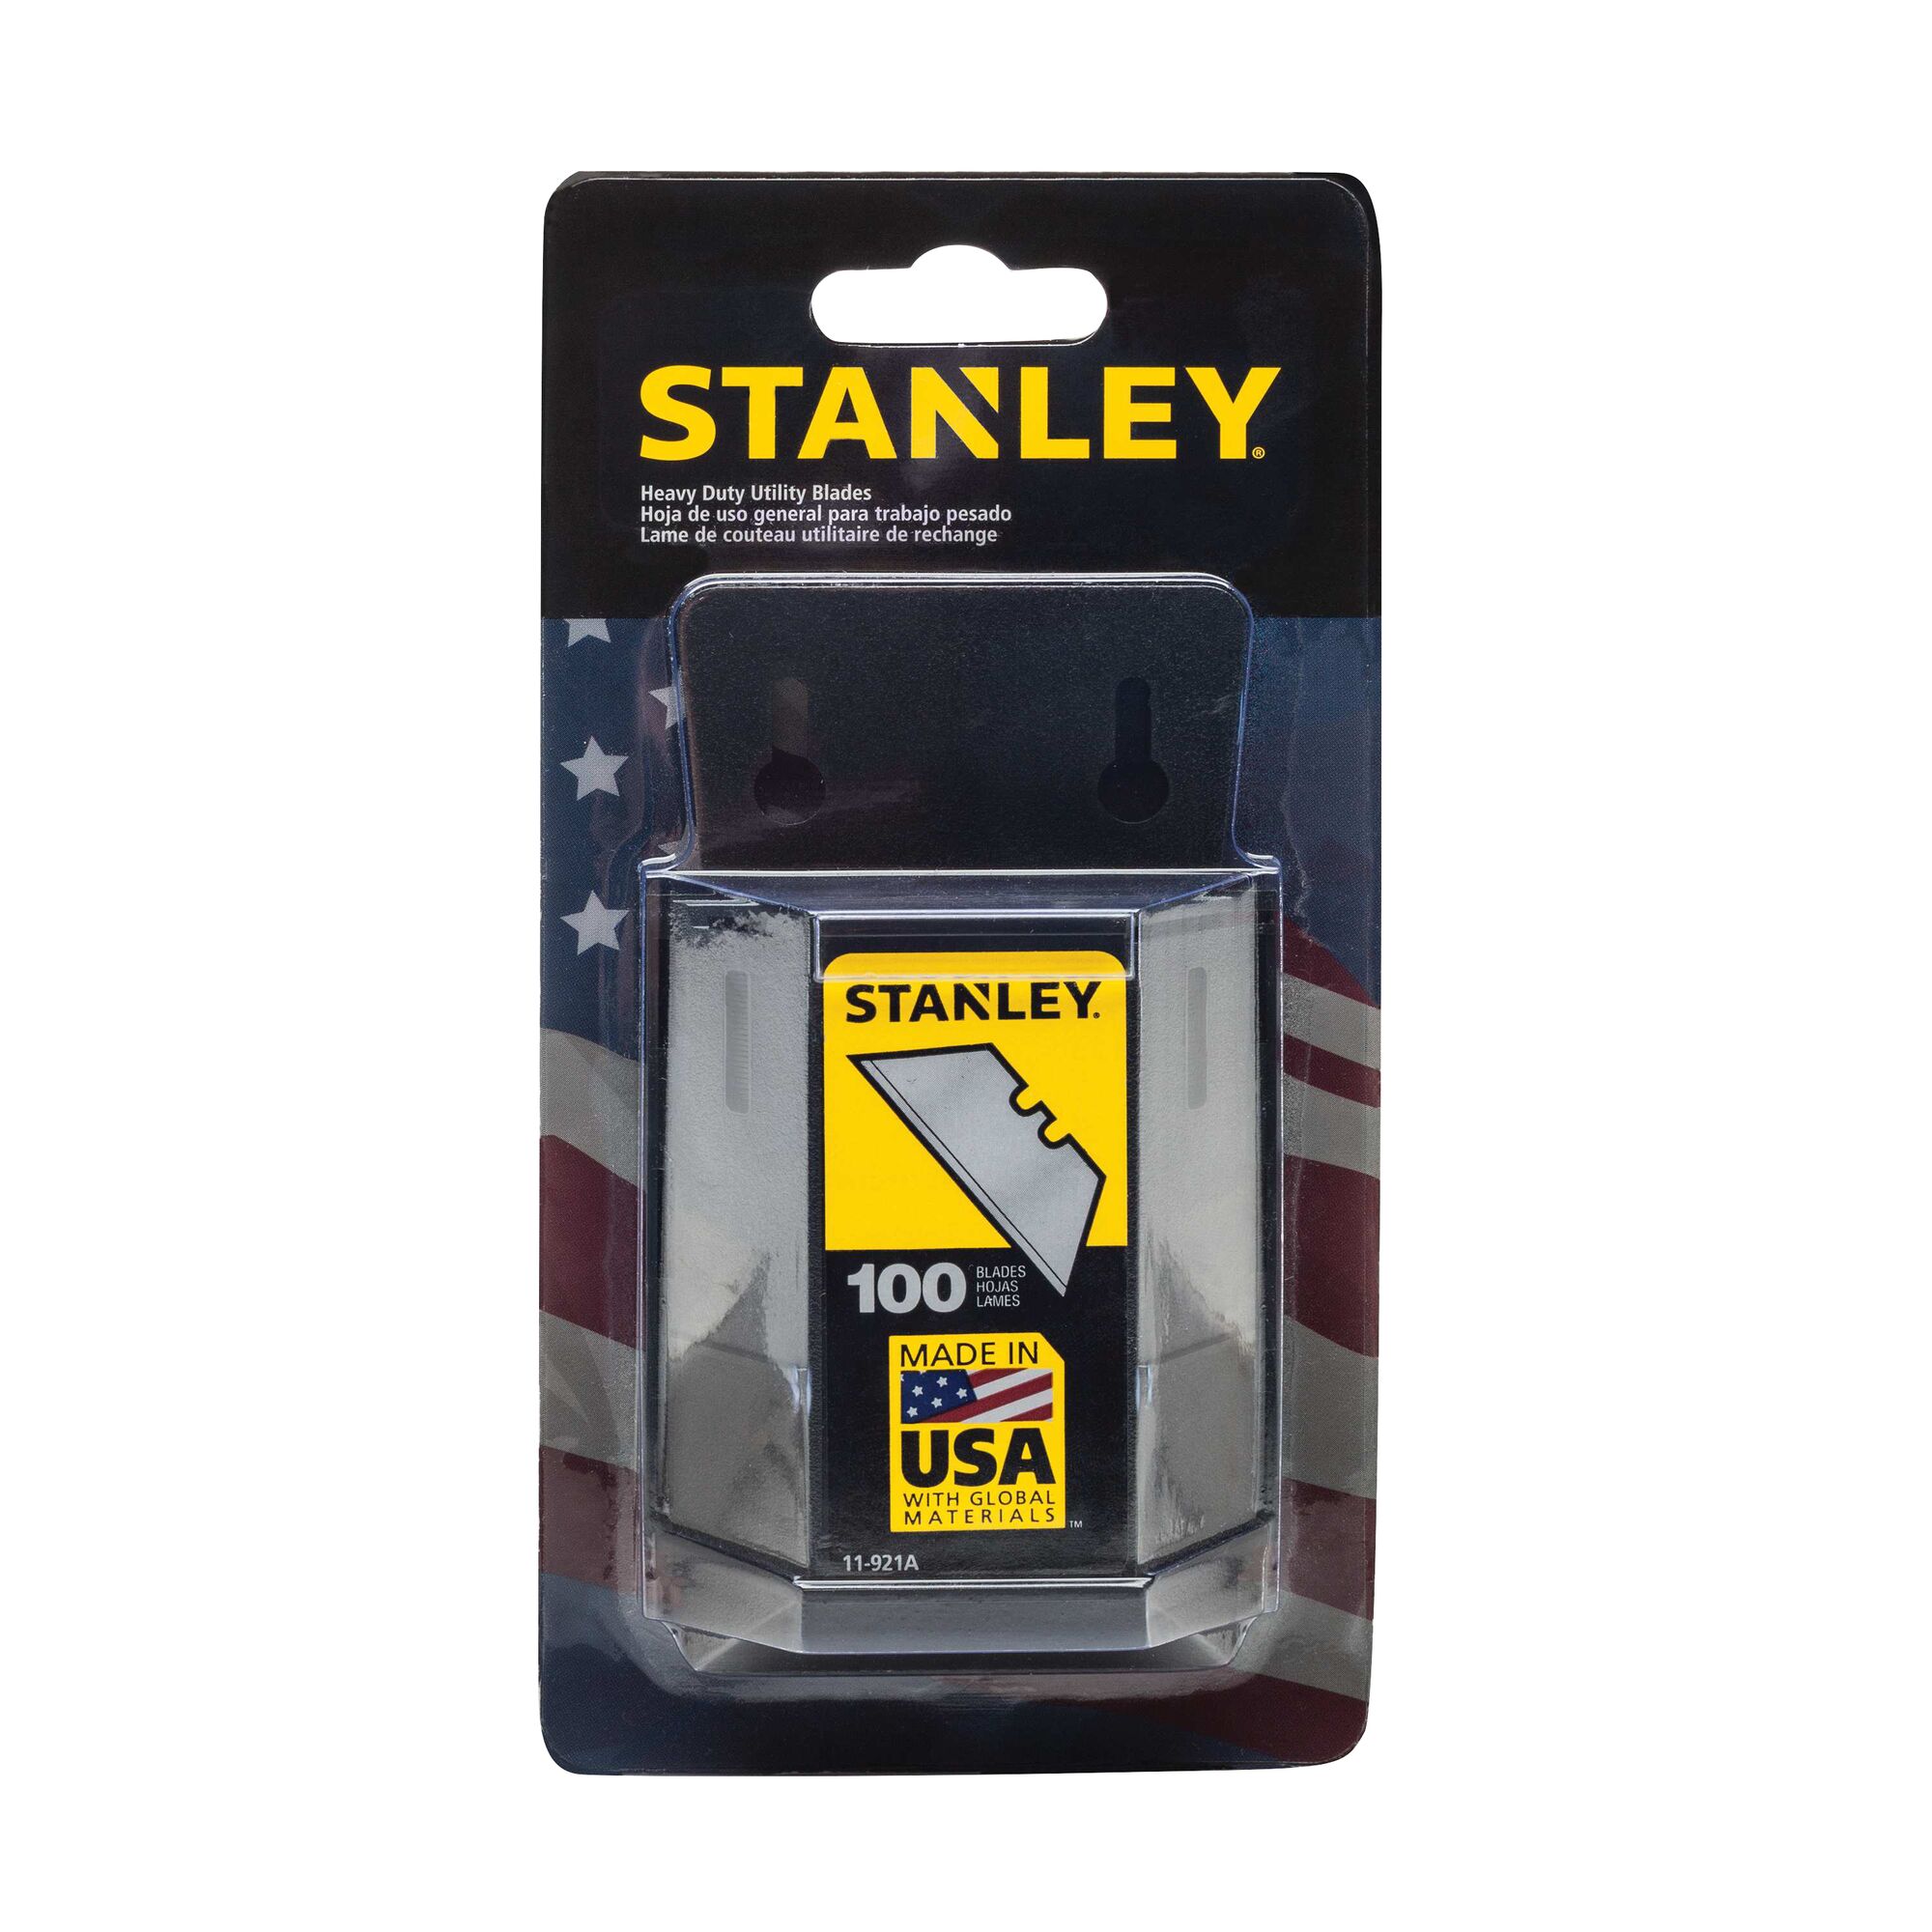 Stanley 150 Heavy Duty Utility Blades With Dispenser for sale online 